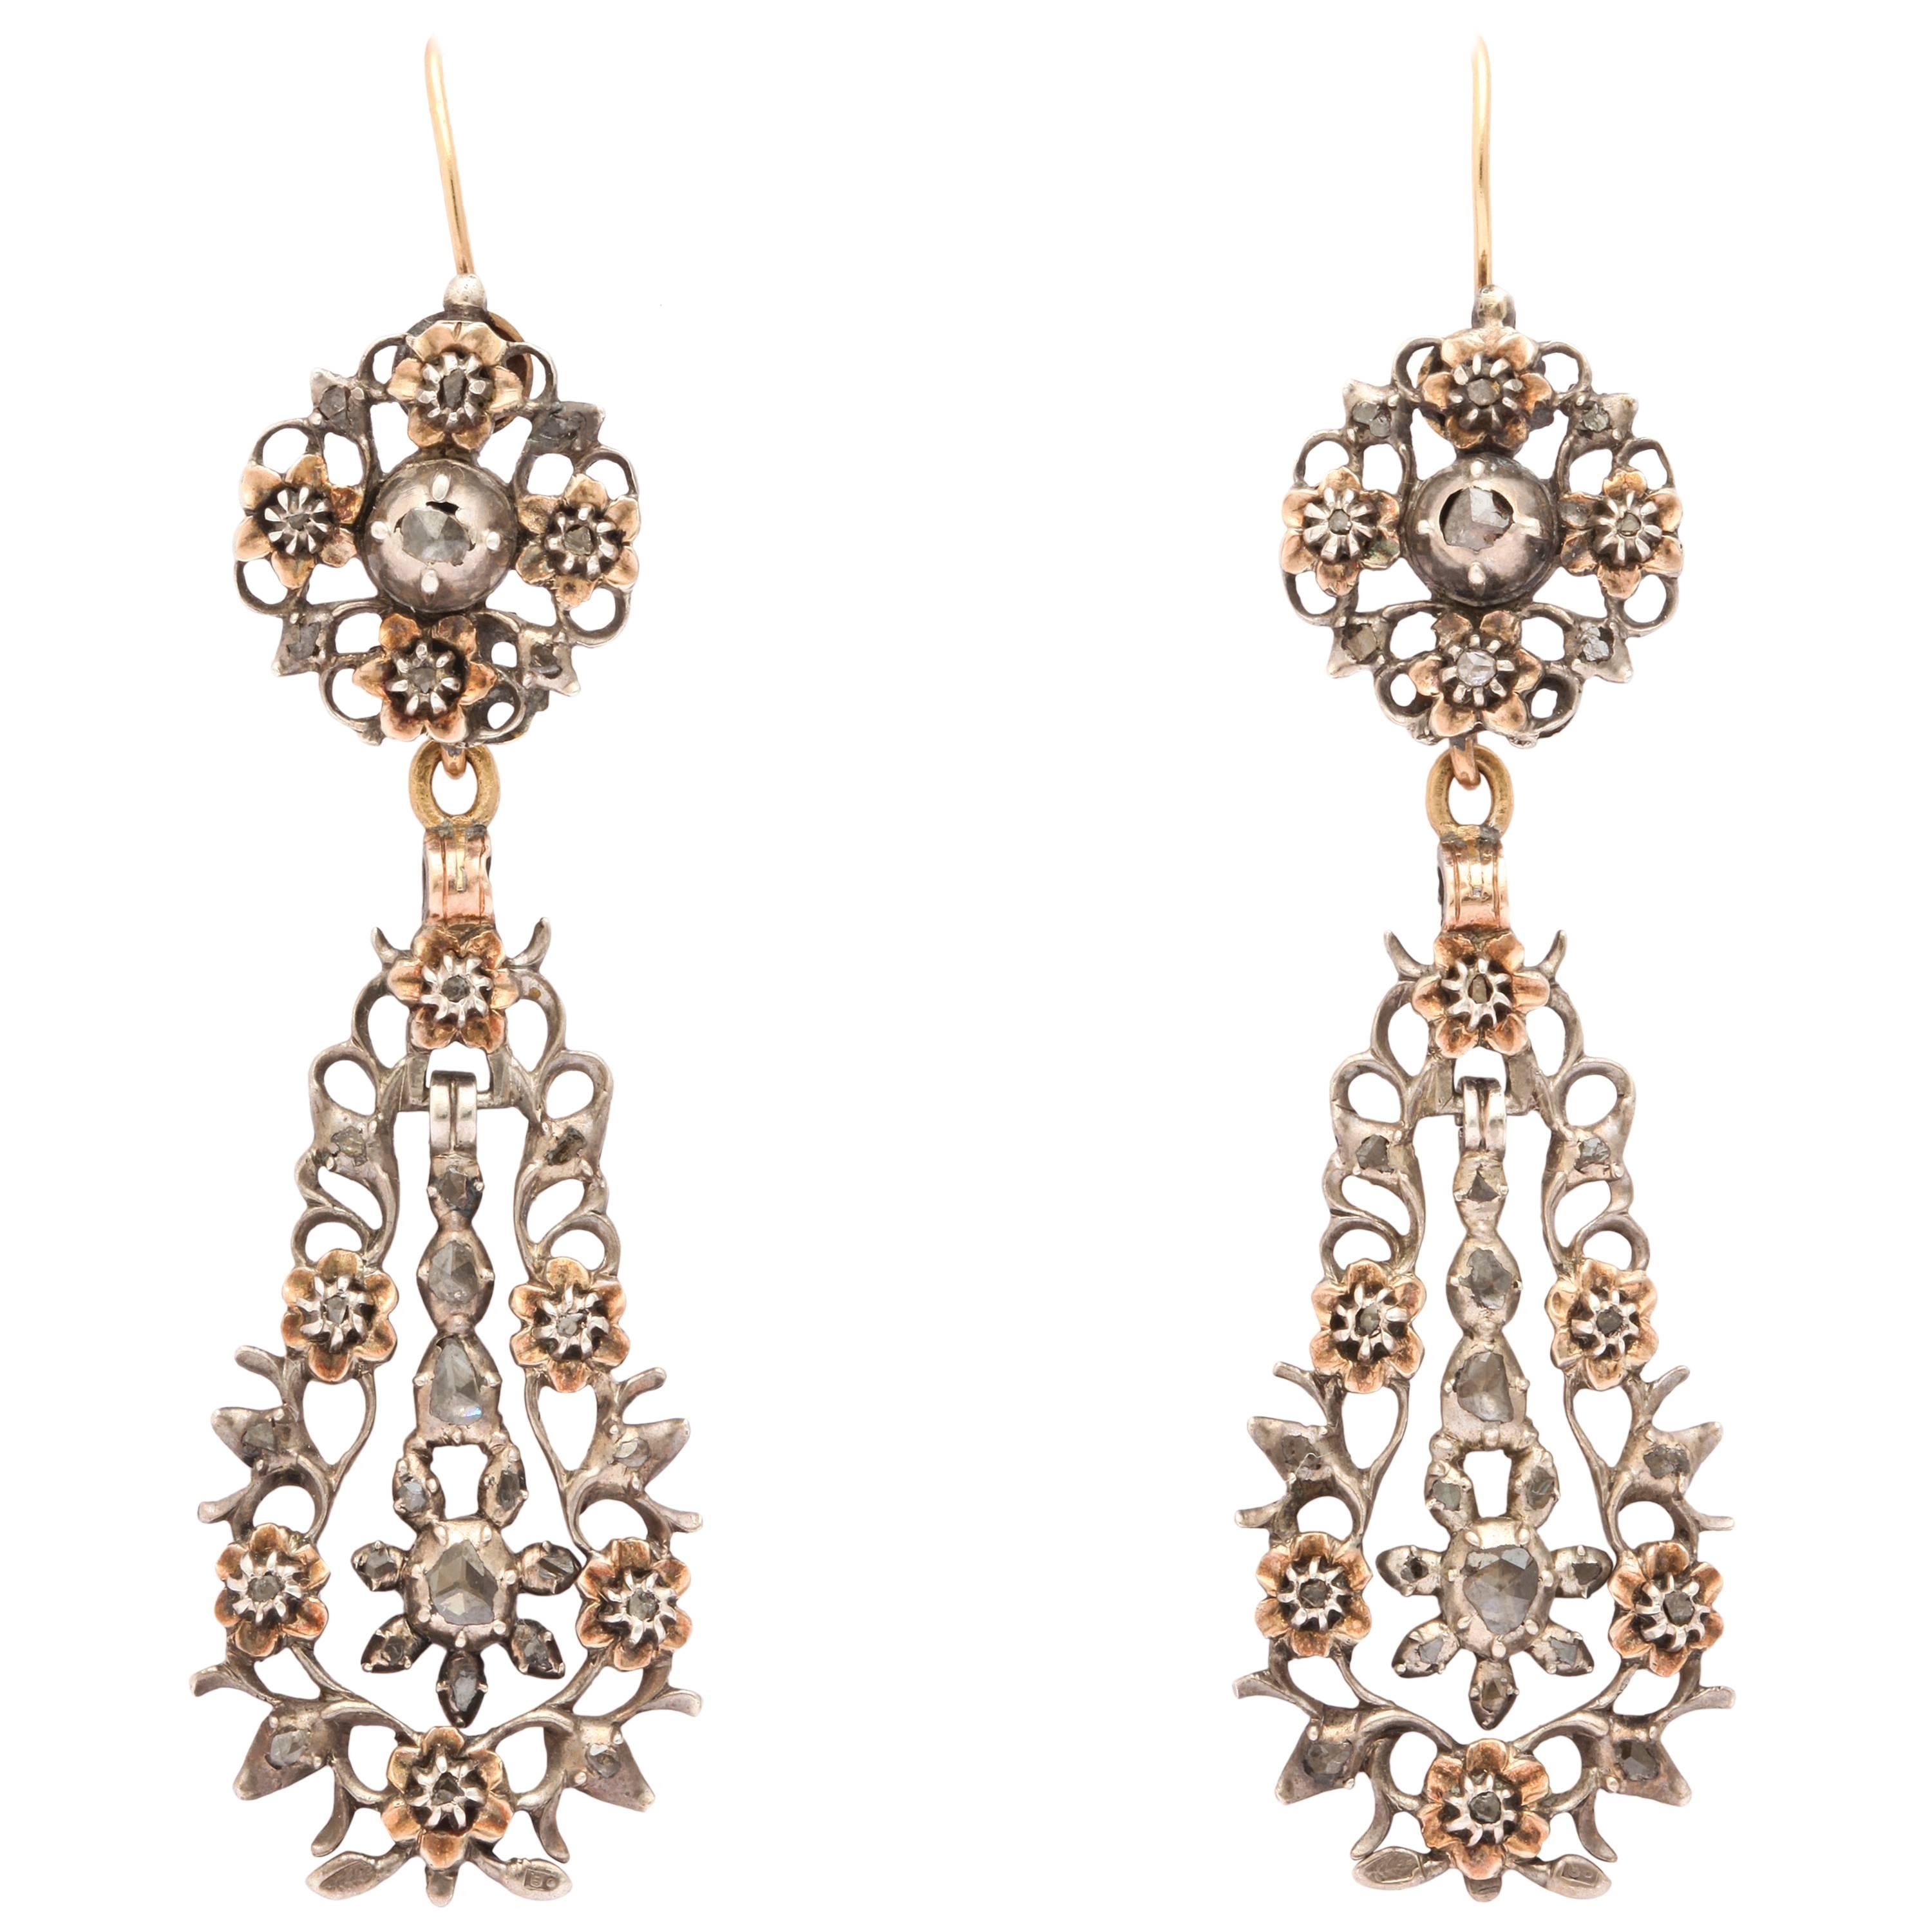 15 kt and Sterling, Gold and Diamond Flemish Chandelier Earrings c.1820 